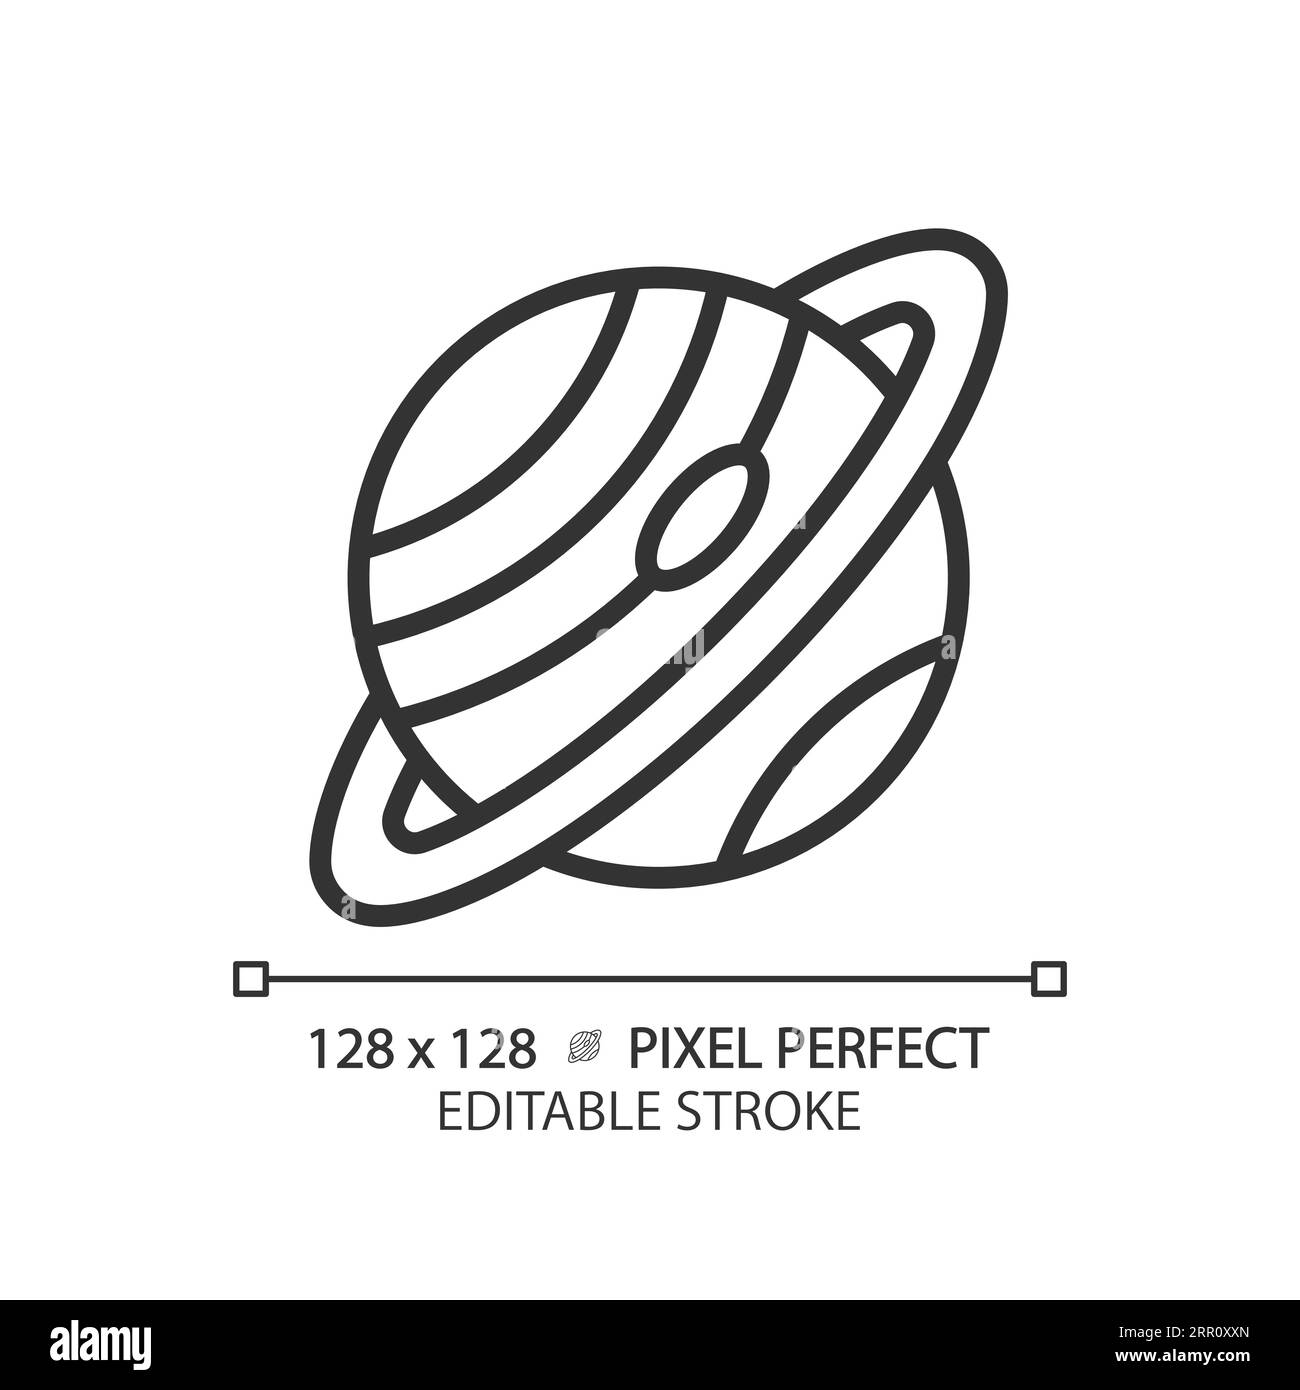 Saturn pixel perfect linear icon Stock Vector